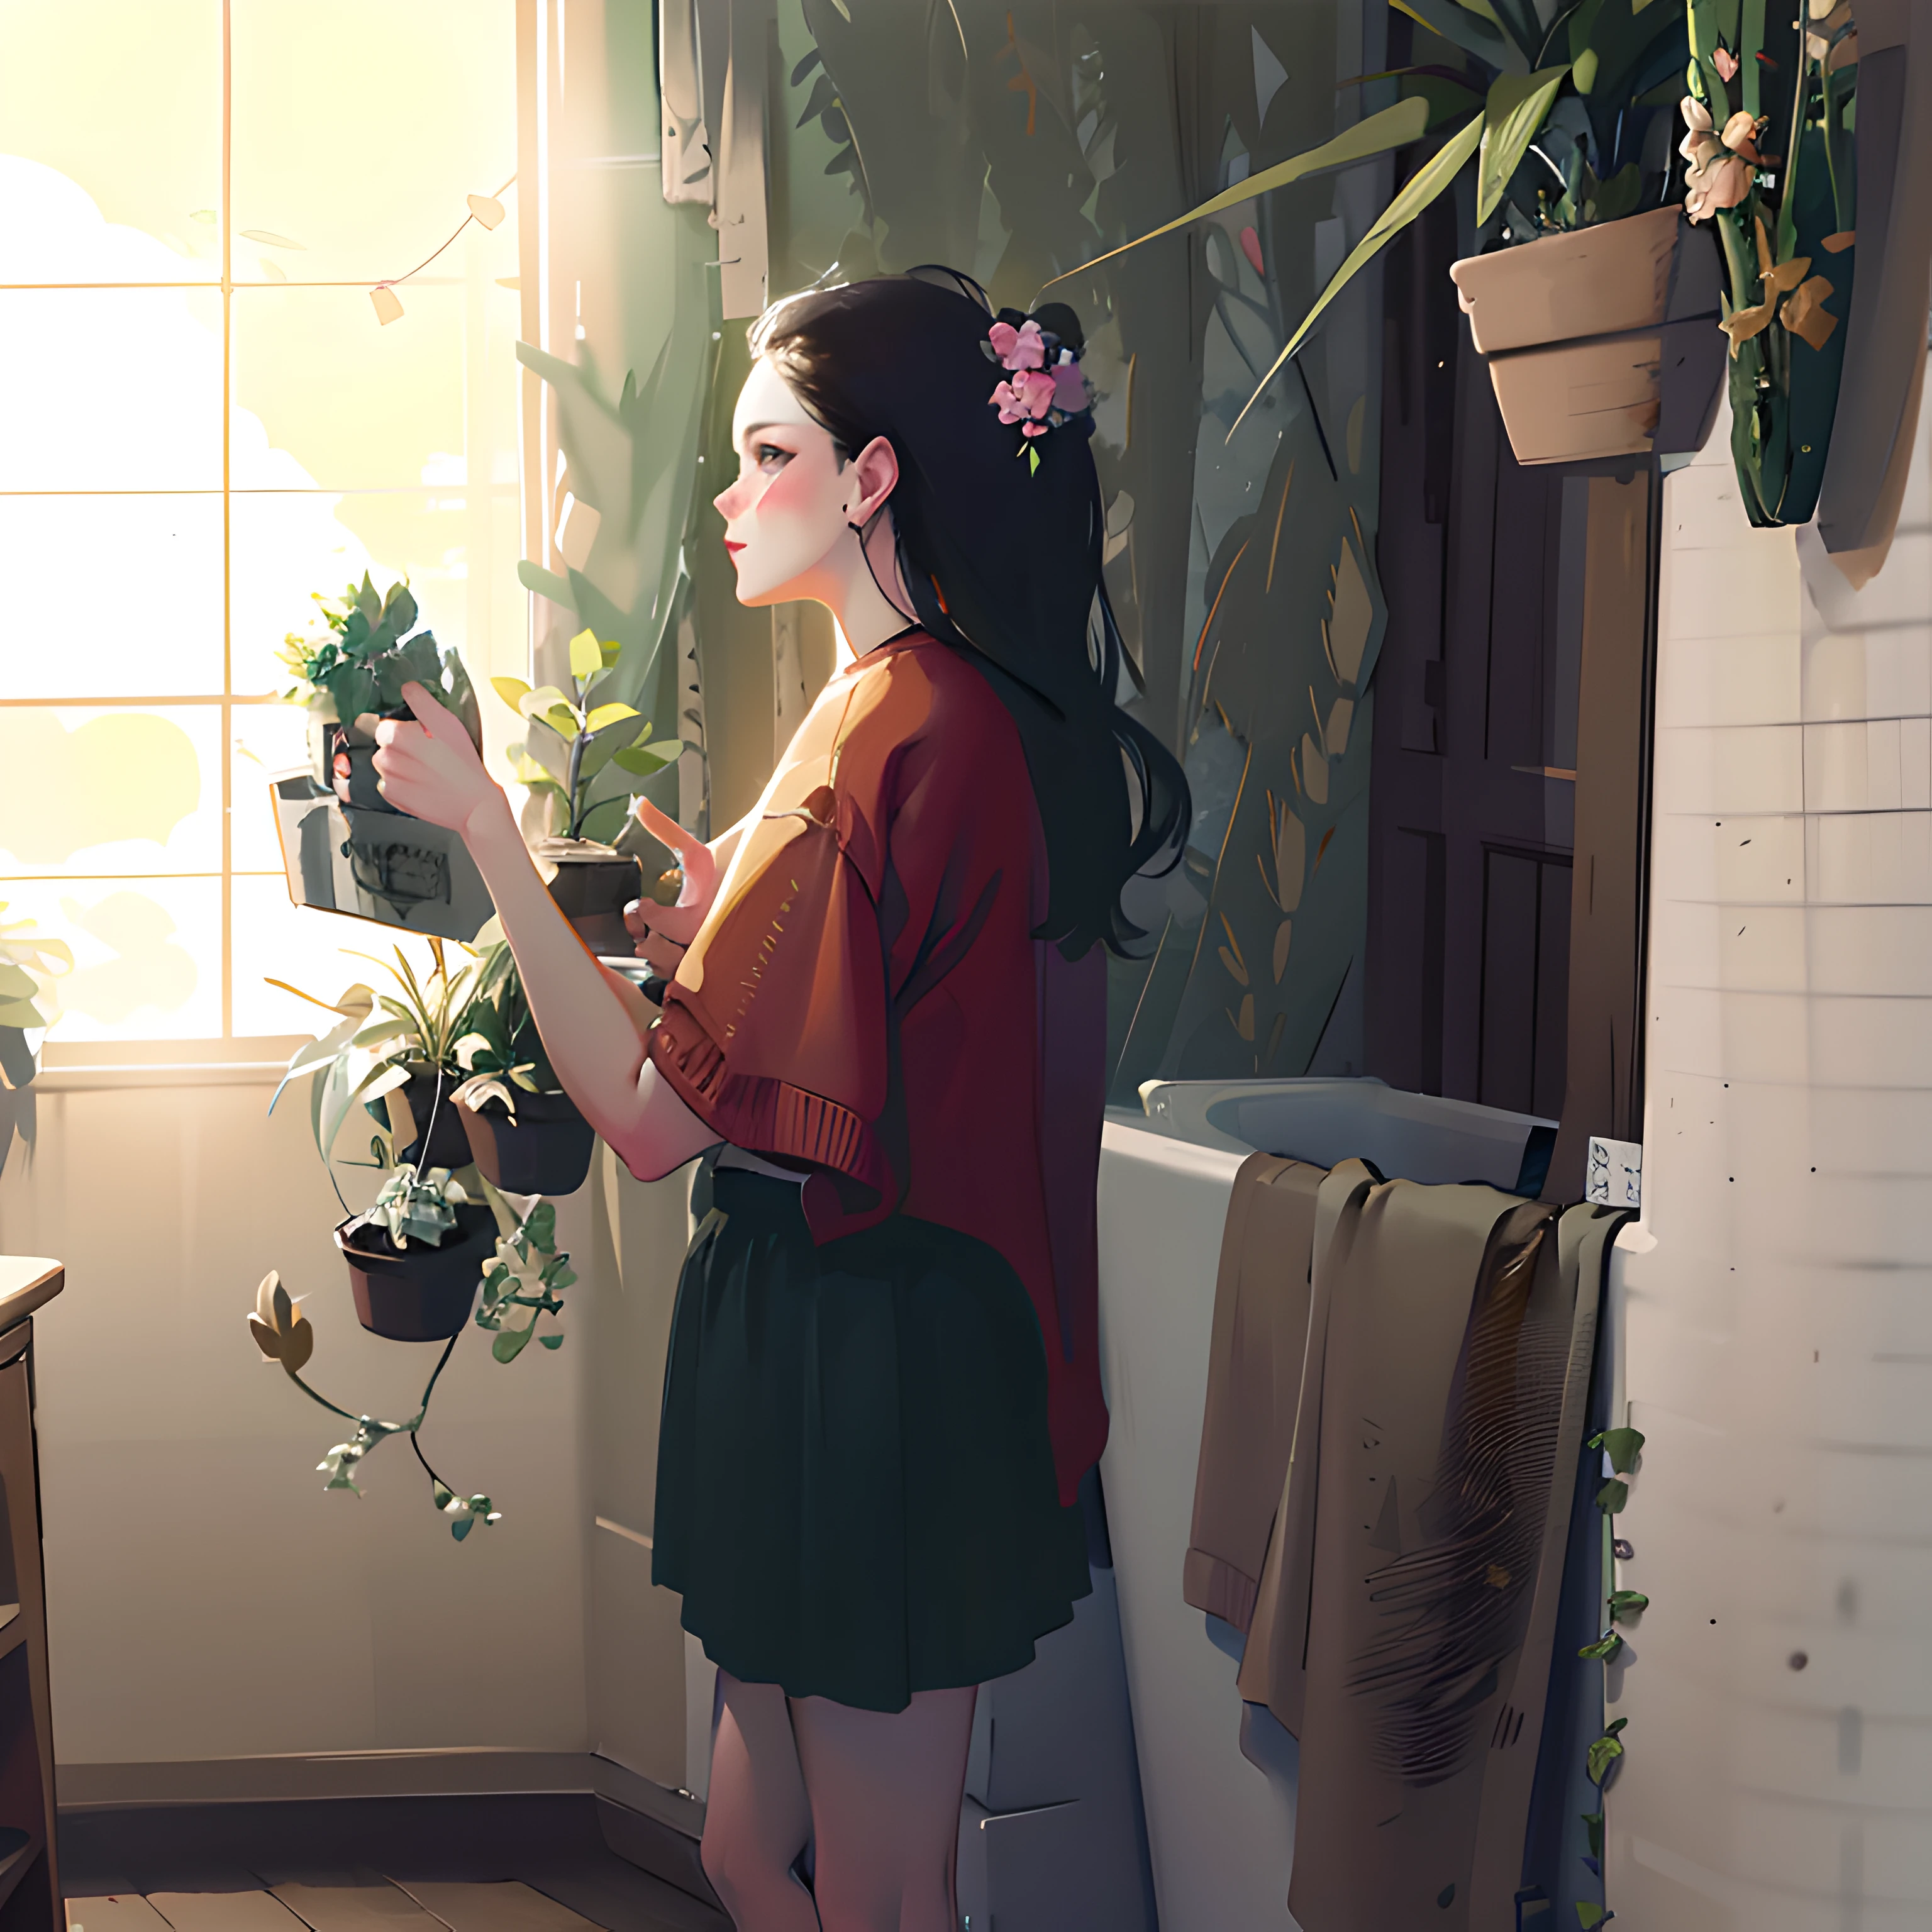 there is a woman standing in a bathroom holding a potted plant, beautiful digital illustration, inspired by loish, loish art style, lofi girl, artwork in the style of guweiz, inspired by Atey Ghailan, lofi art, loish |, lofi portrait at a window, beautiful digital artwork, lofi portrait, concept art digital illustration